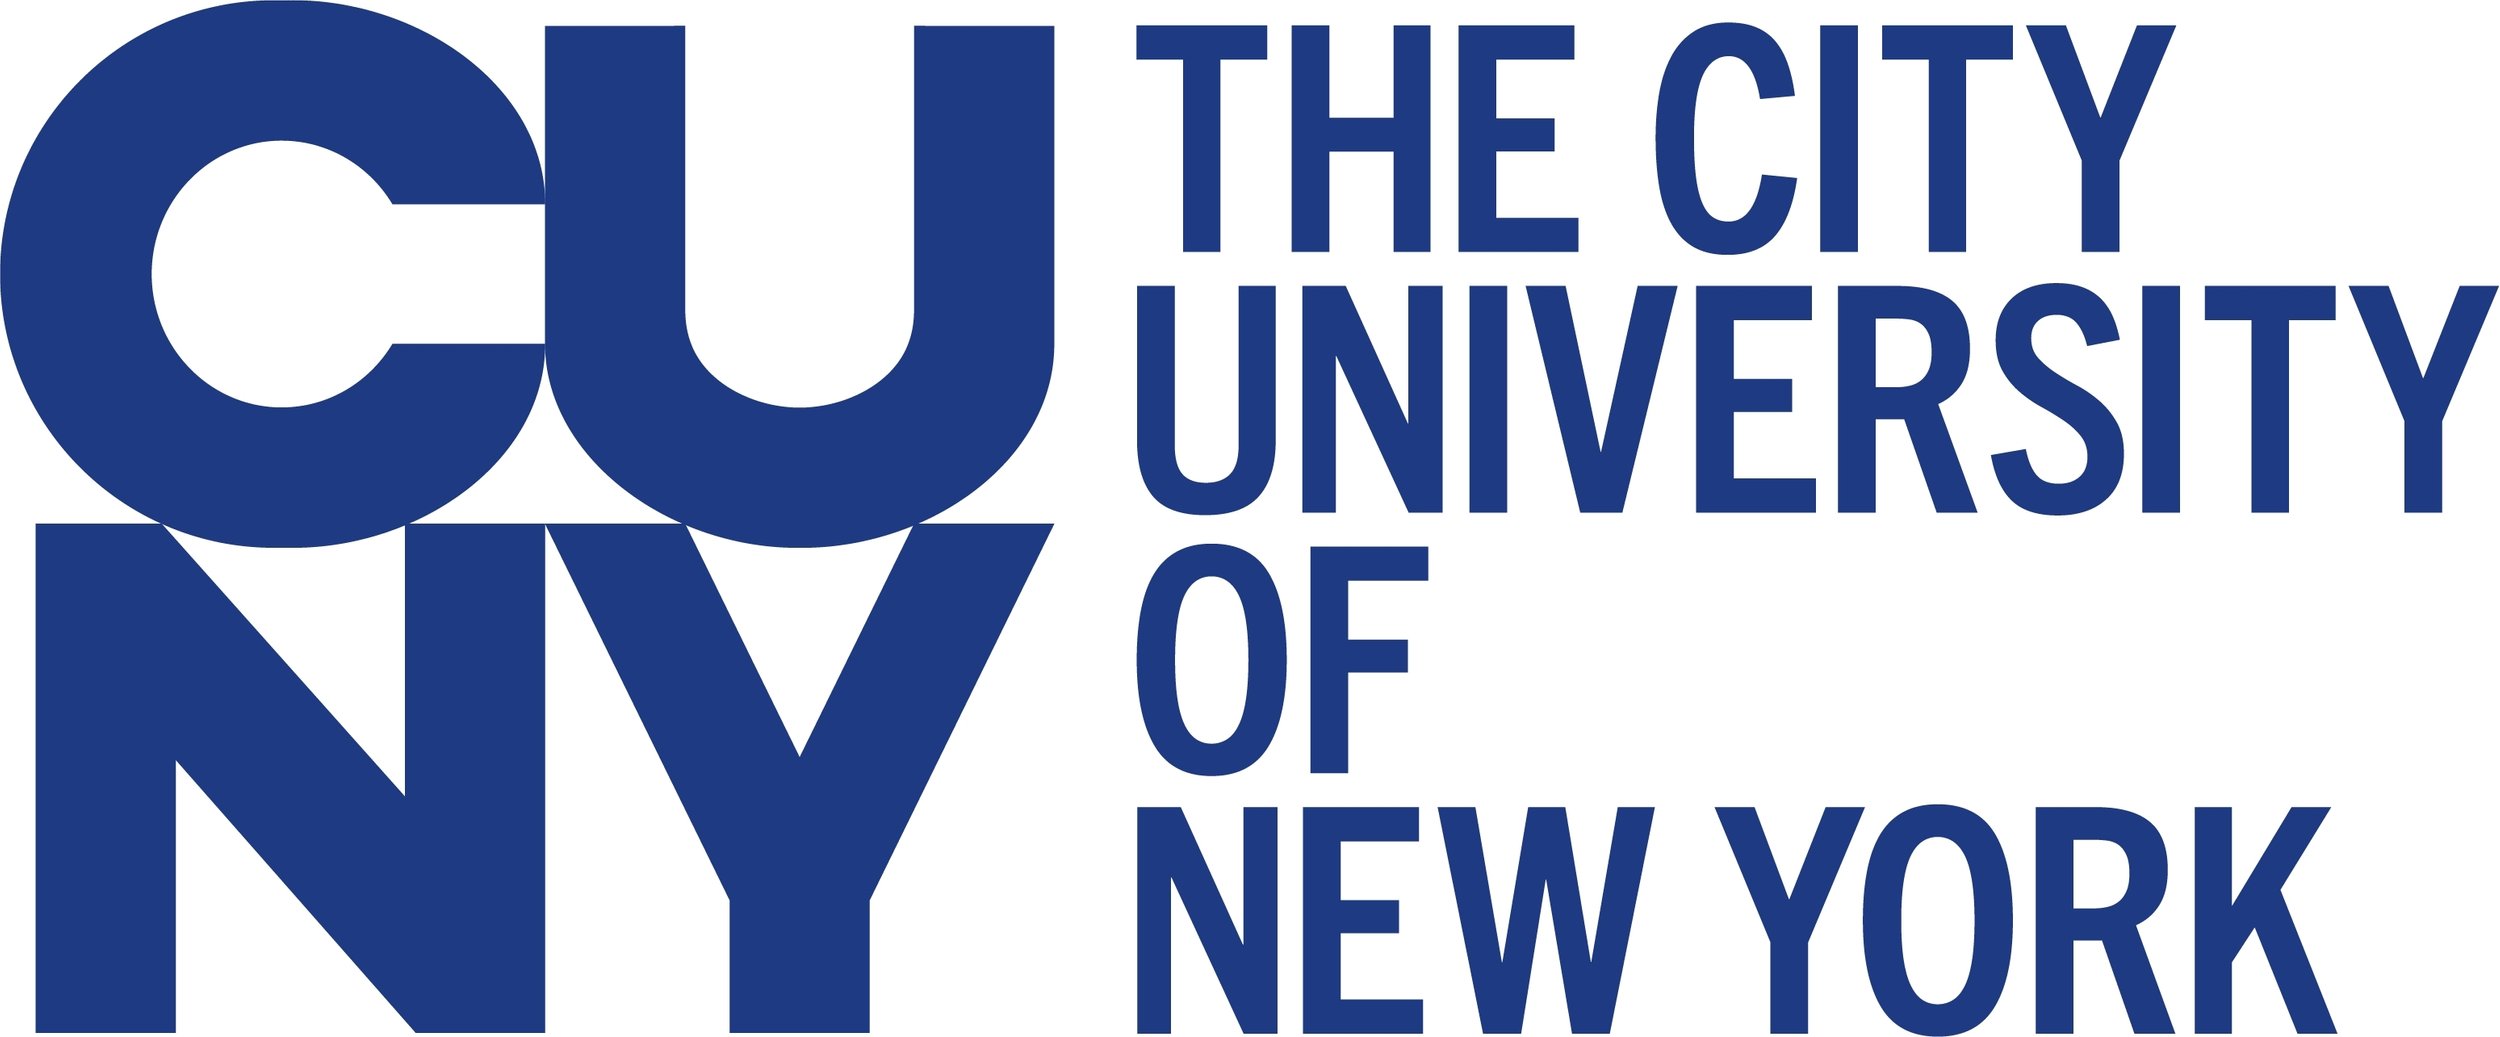 CUNY_Logo_with_Name_Right_Blue_RGB.jpg